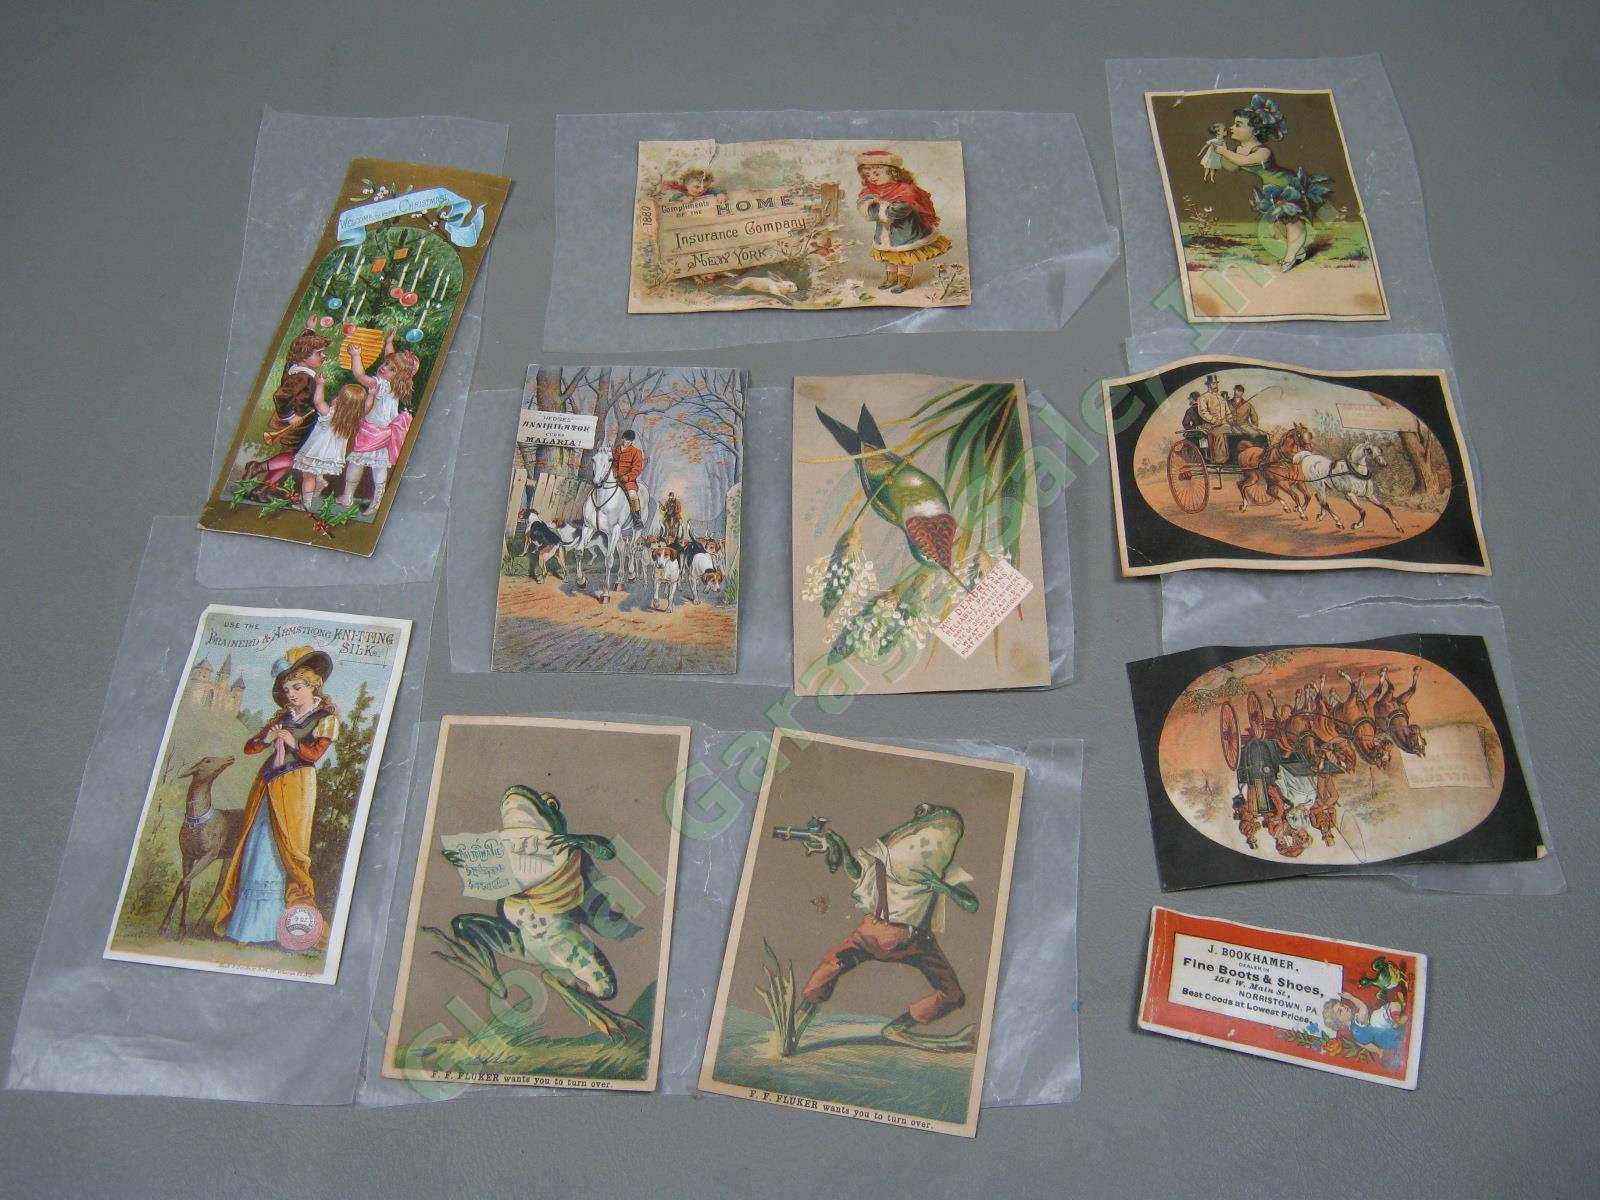 Huge Lot Assorted Vintage Antique Victorian Advertising Trade Cards Collection + 1